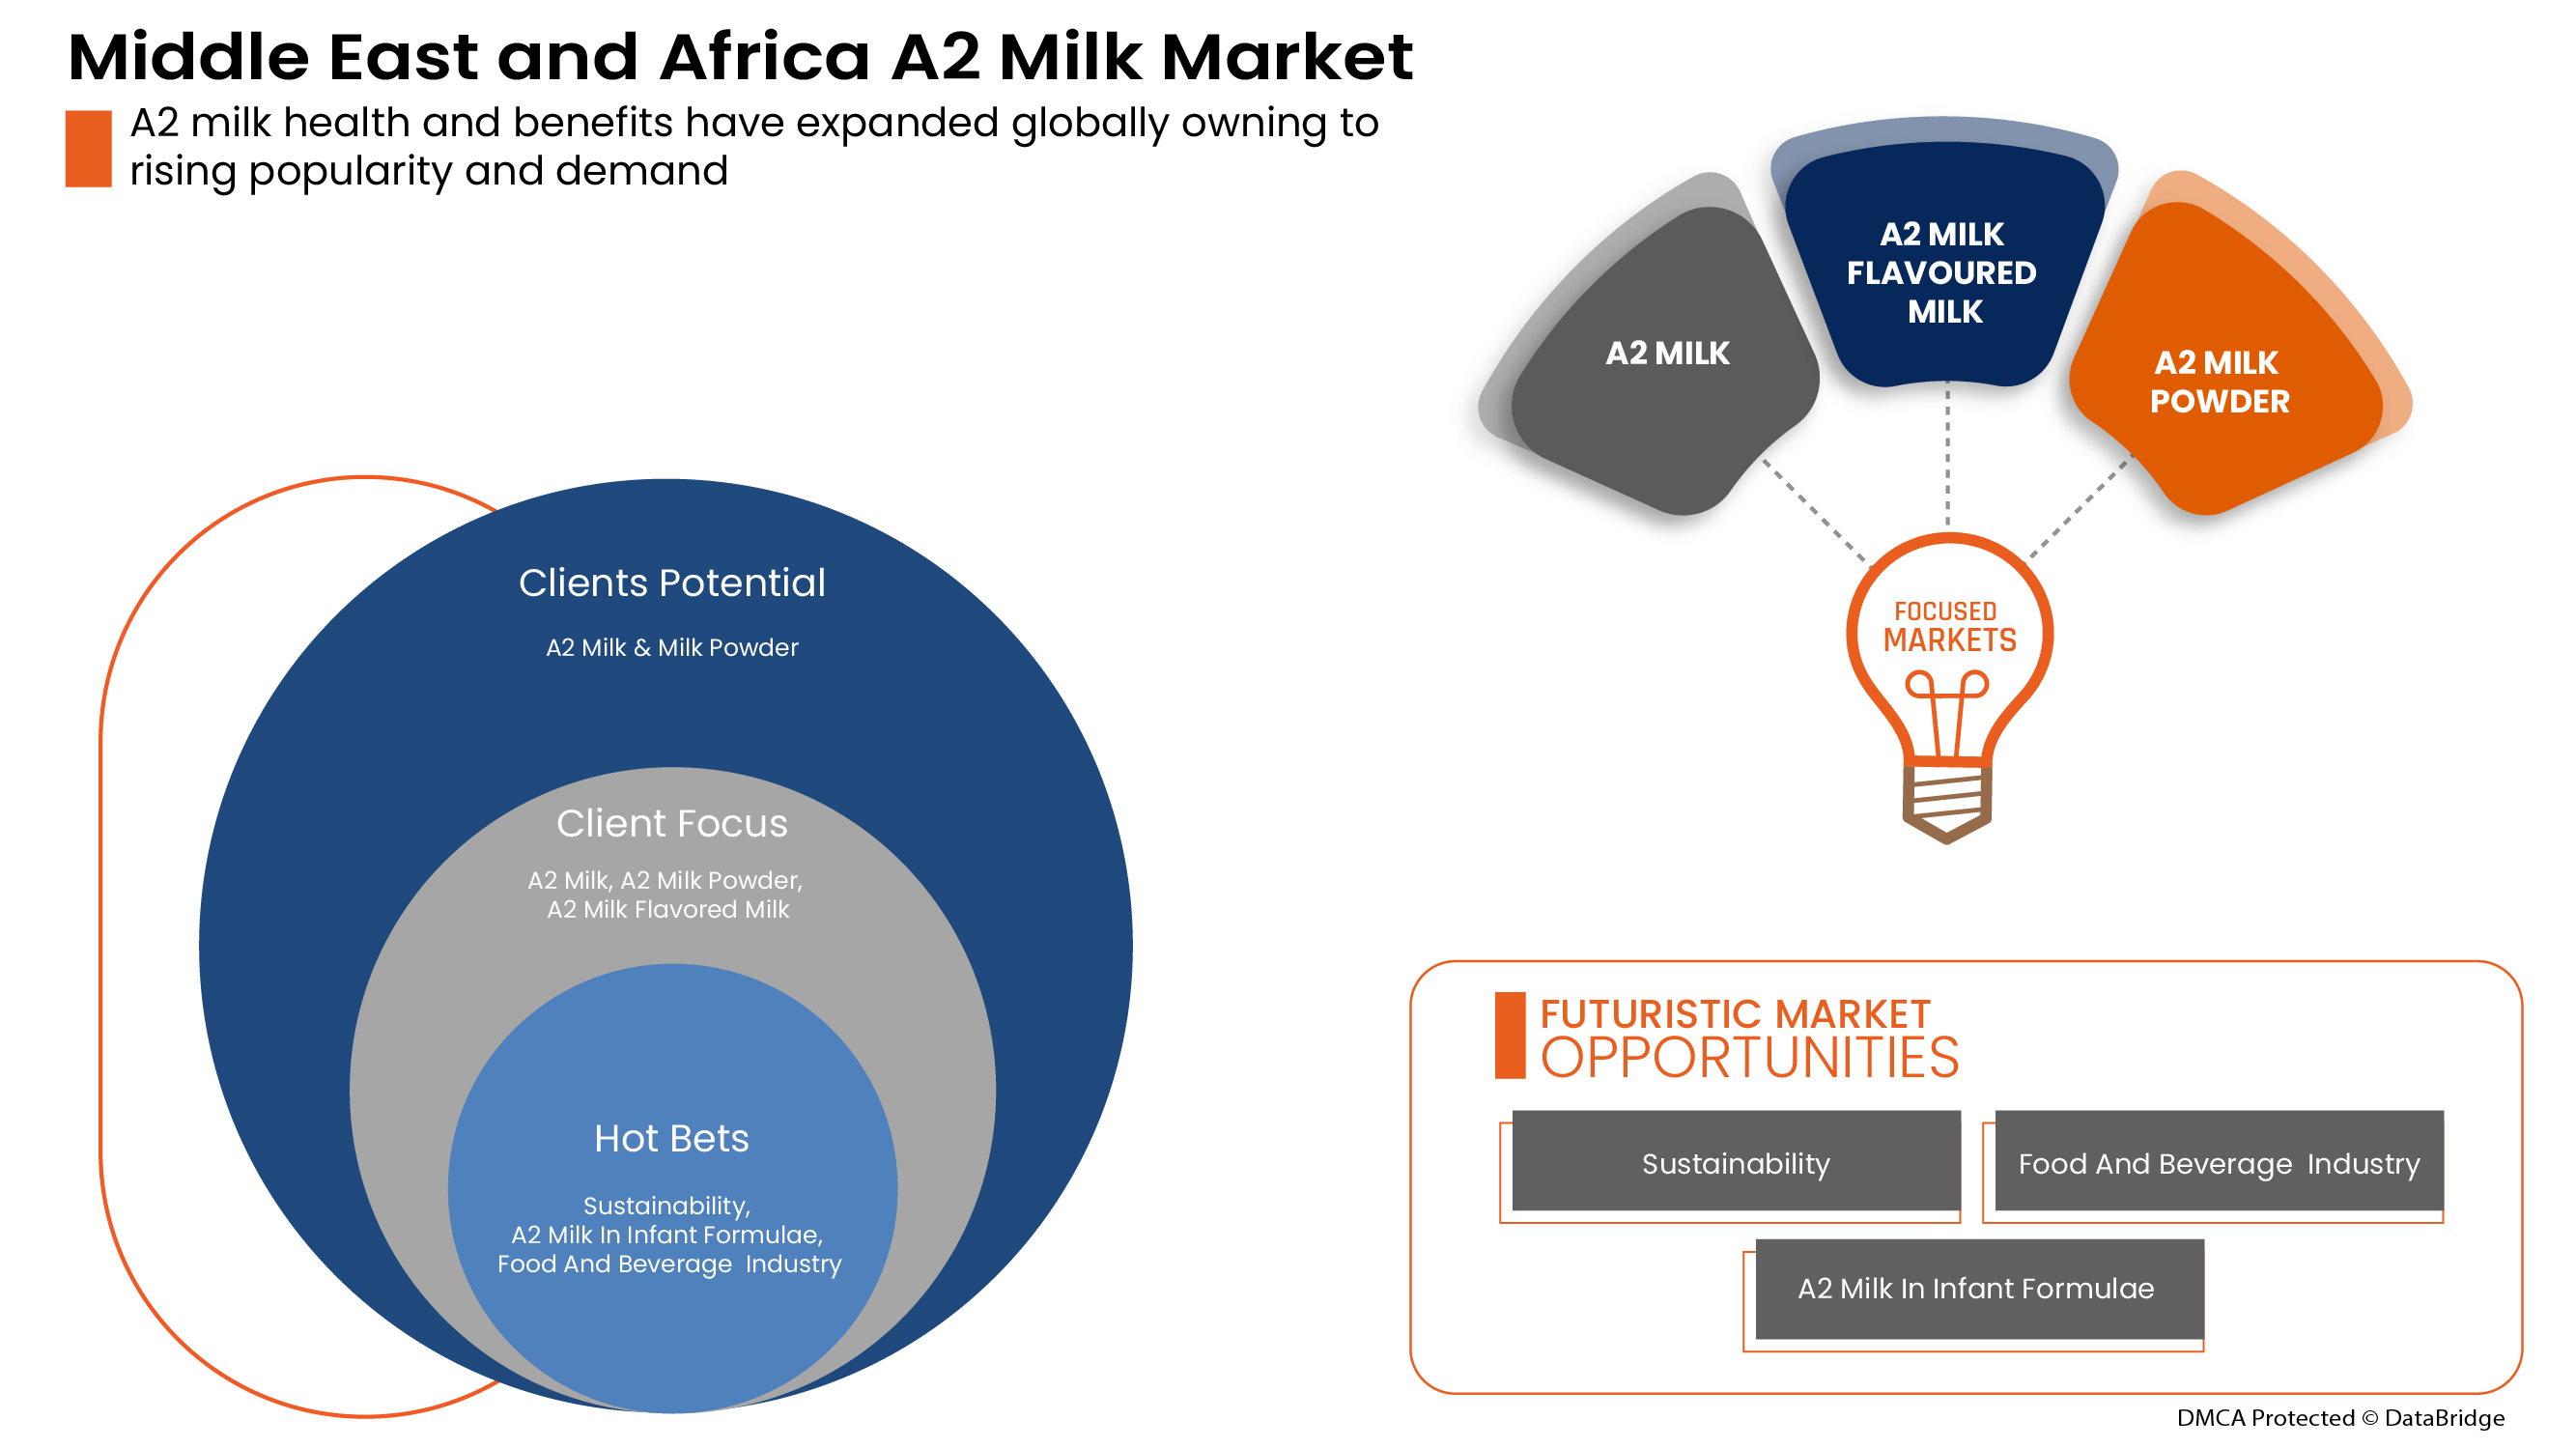 Middle East and Africa A2 Milk Market